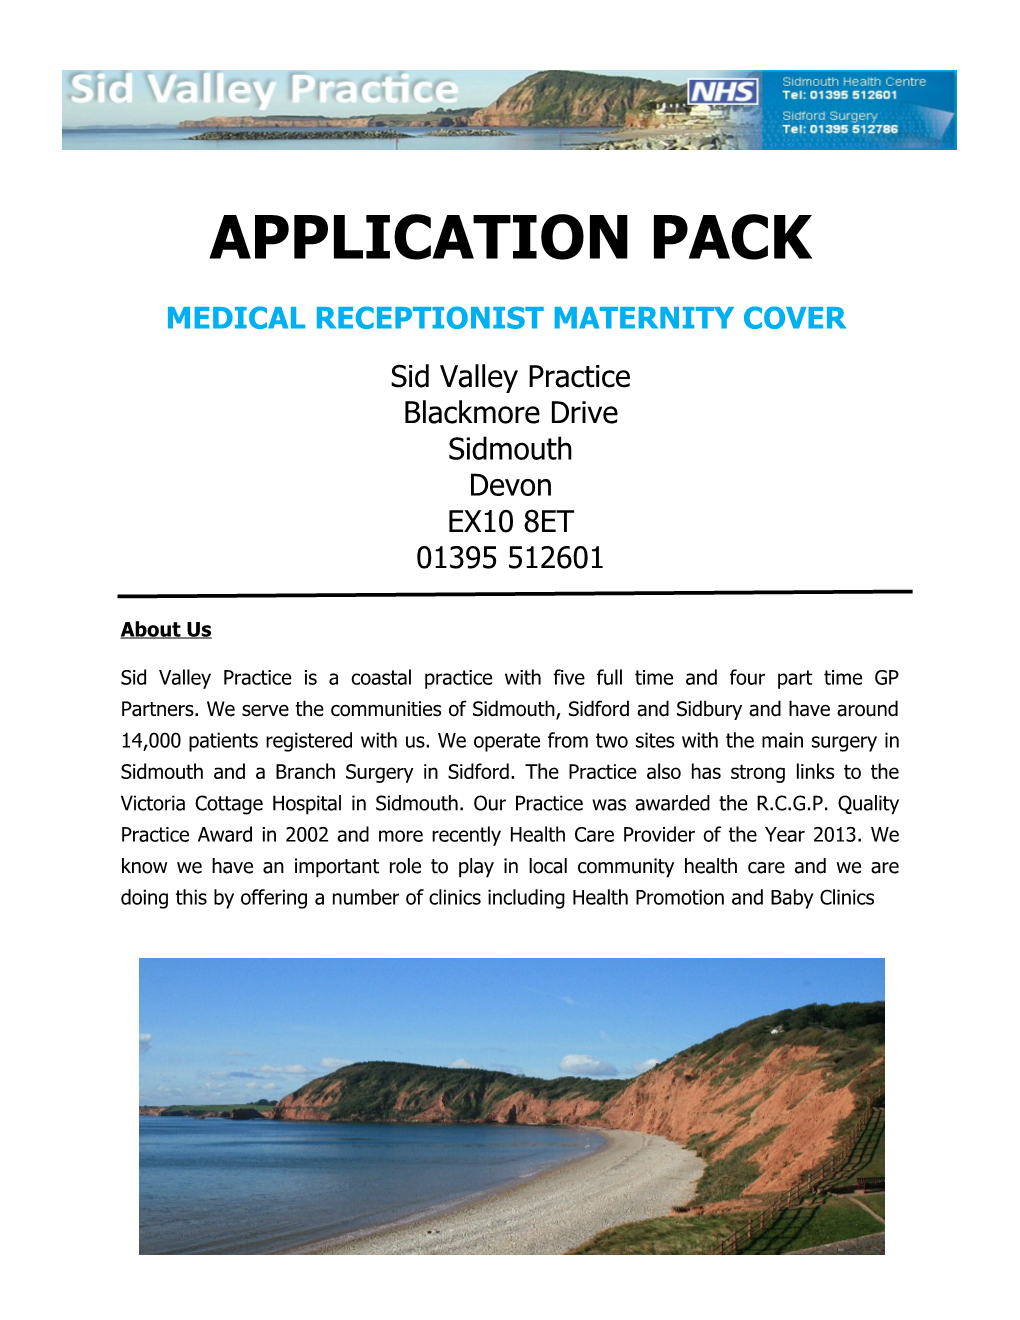 Medical Receptionist Maternity Cover